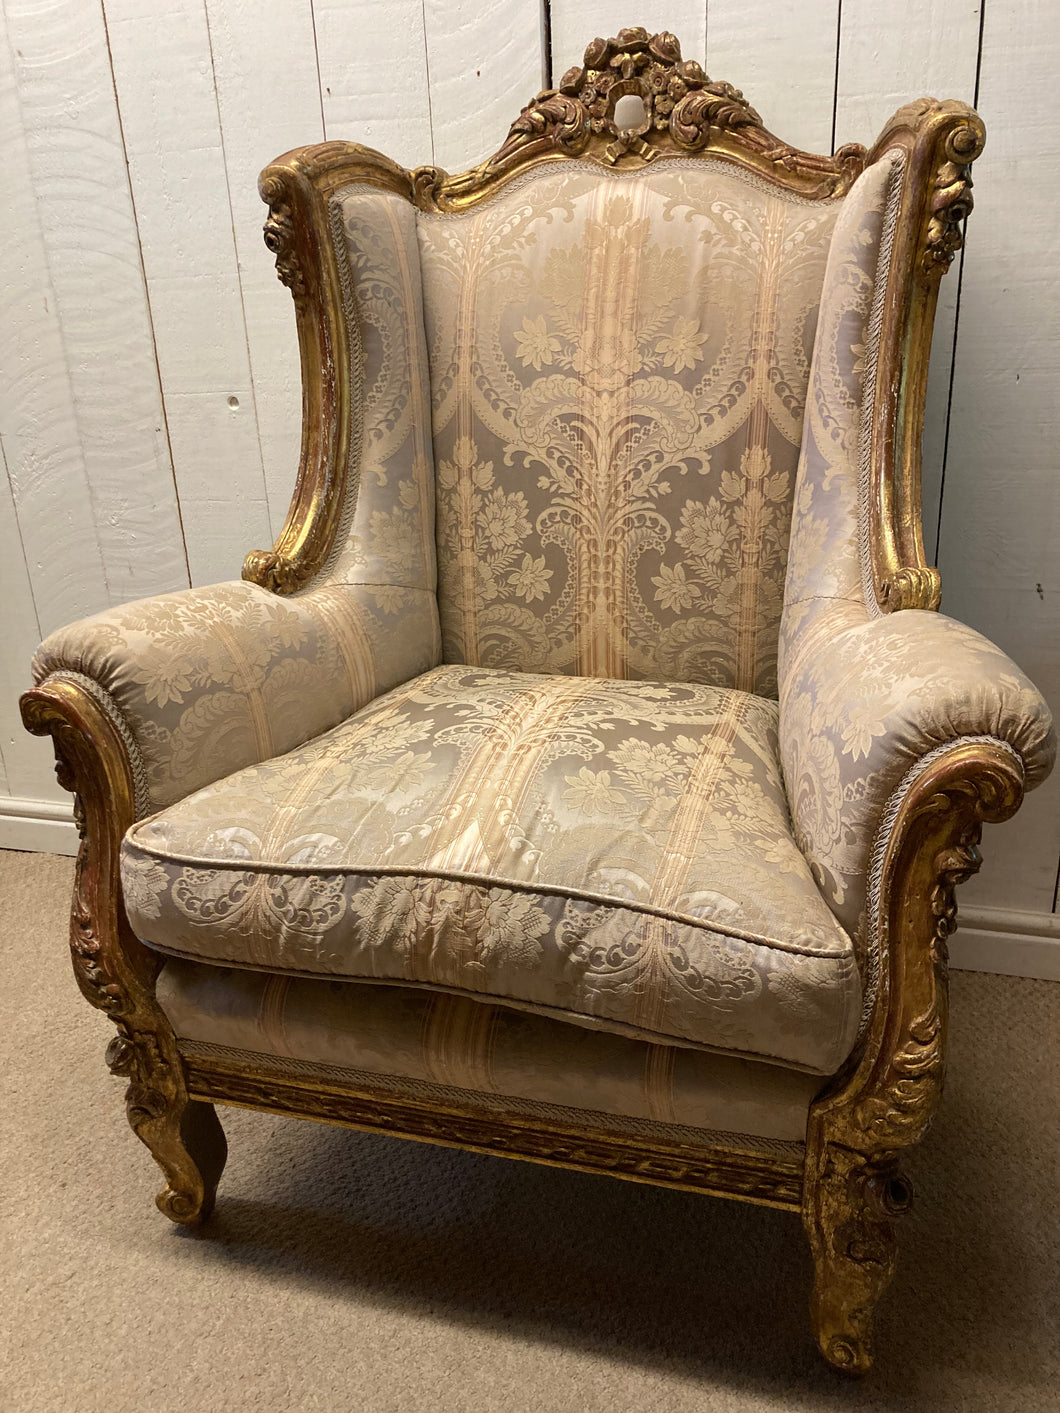 Vintage French Style Rococo Gold Framed Armchair Upholstered In Silk Damask